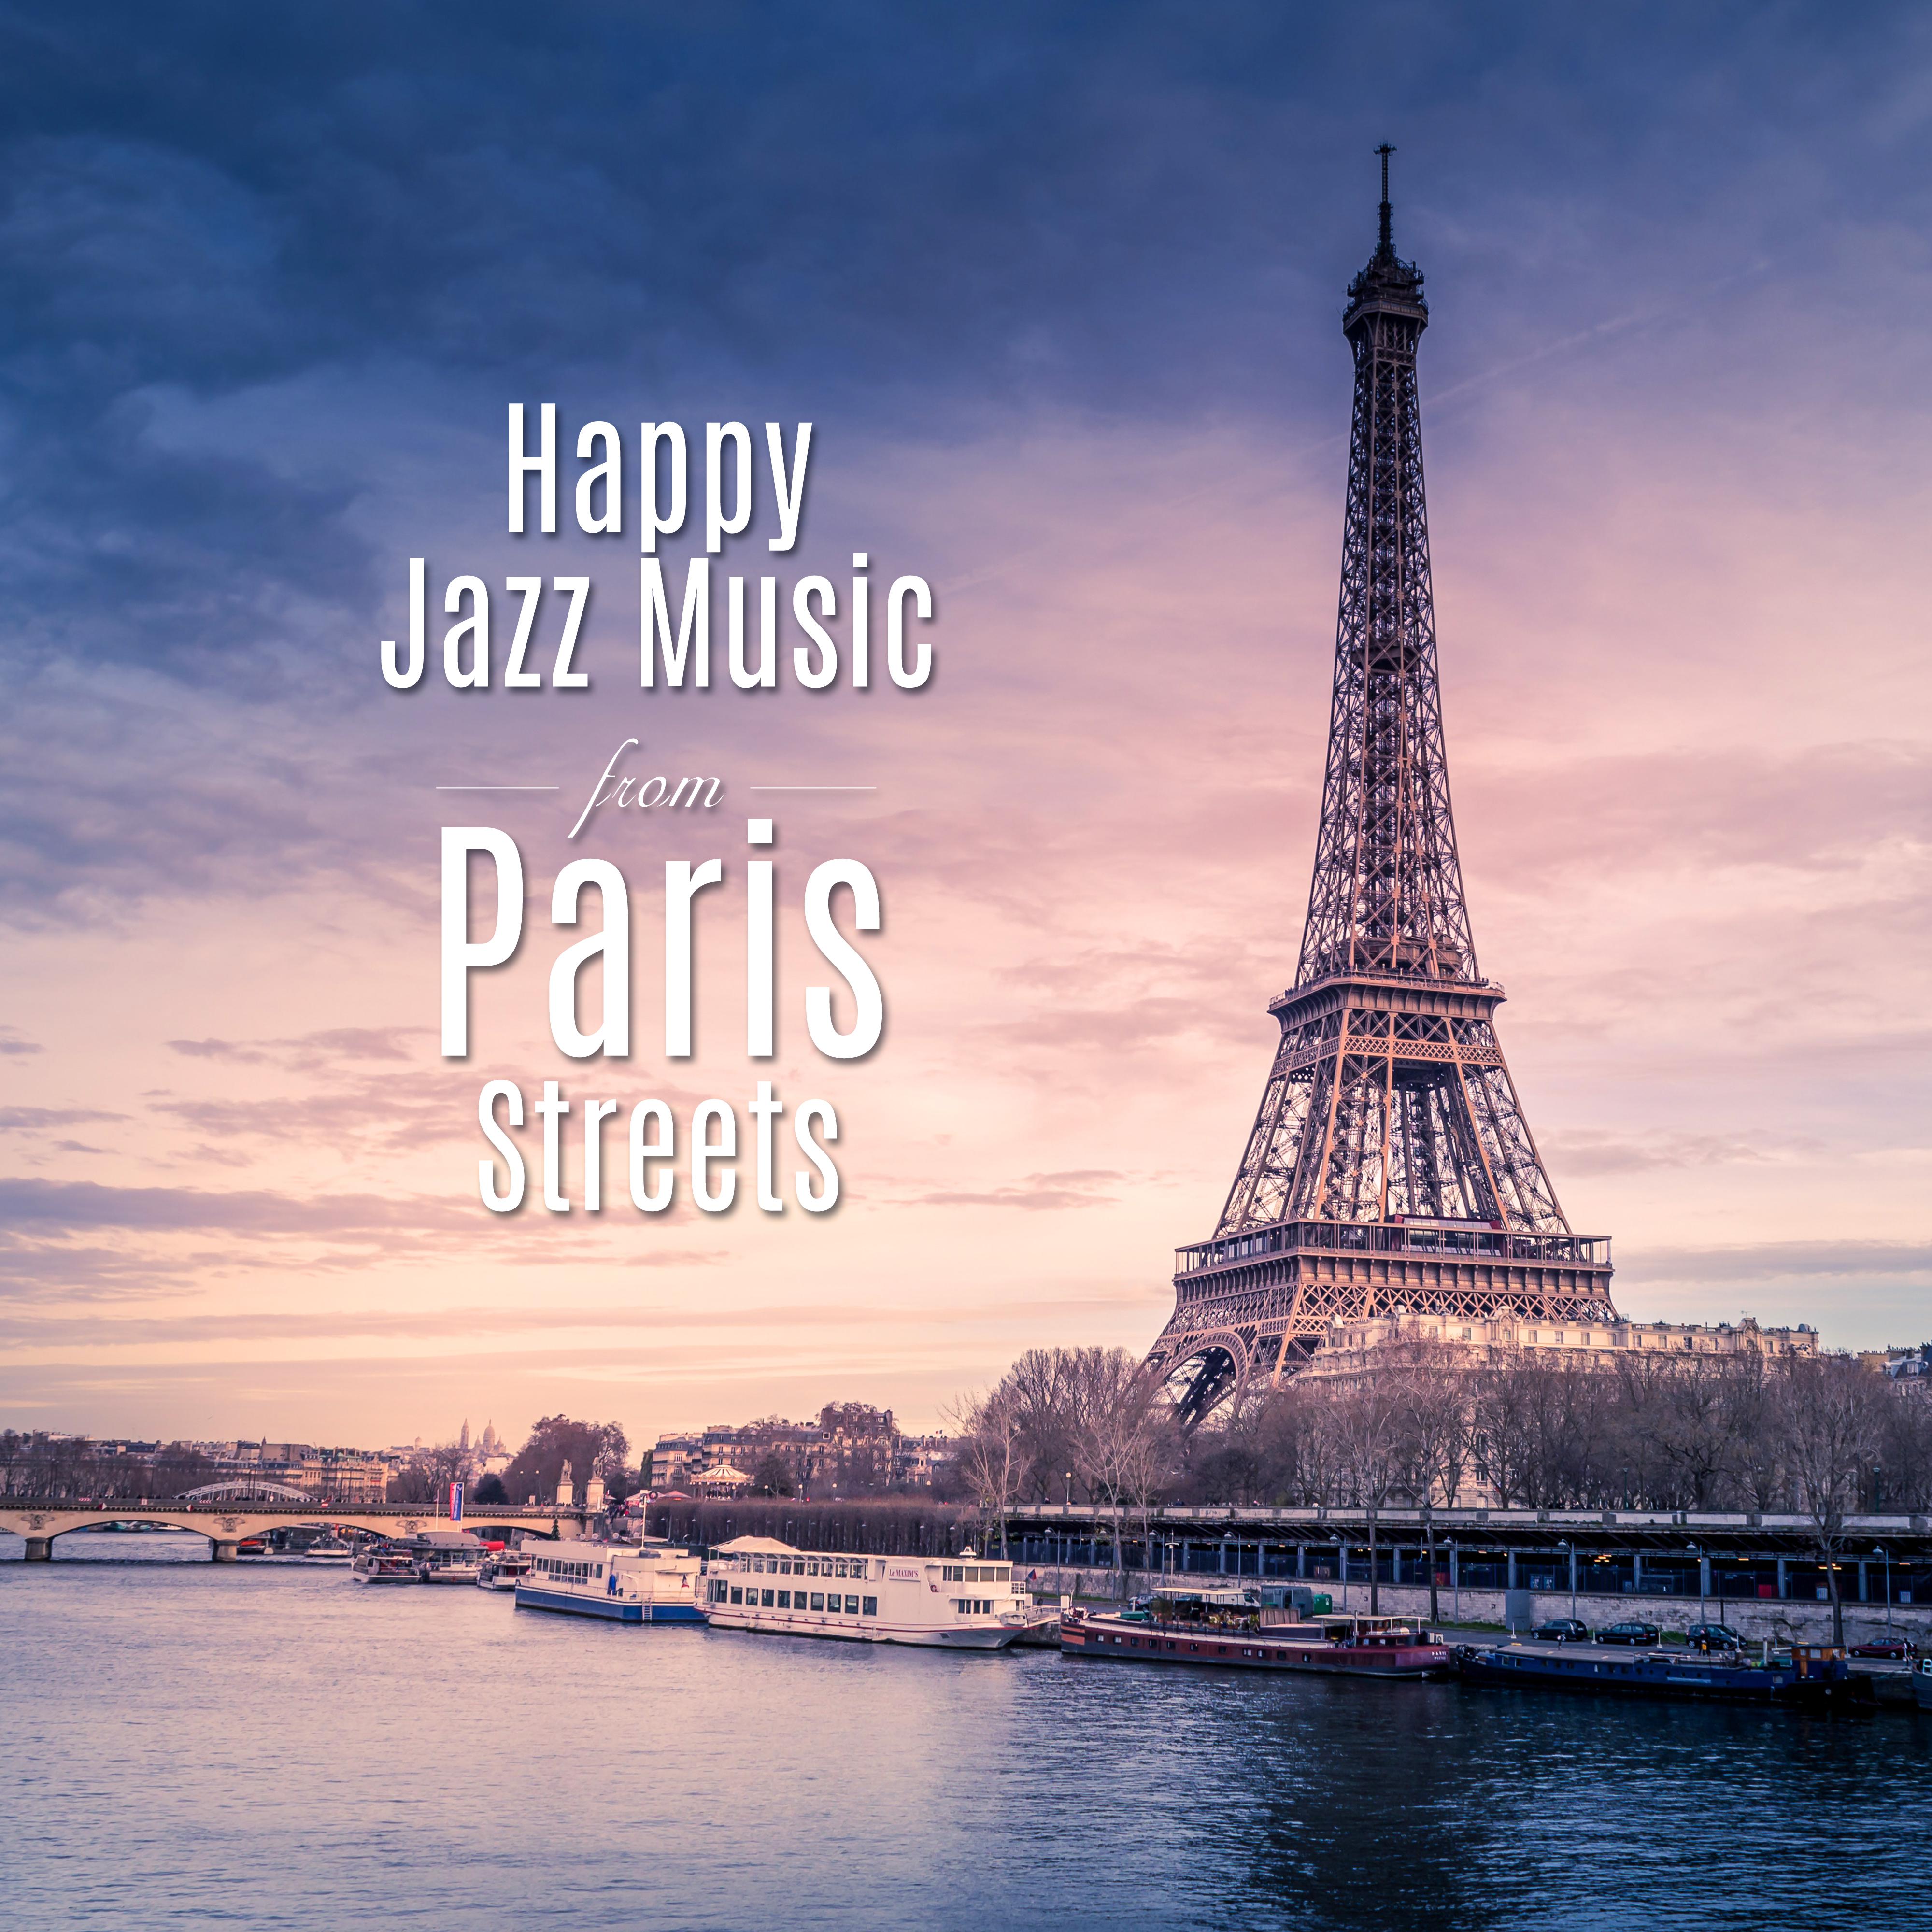 Happy Jazz Music from Paris Streets